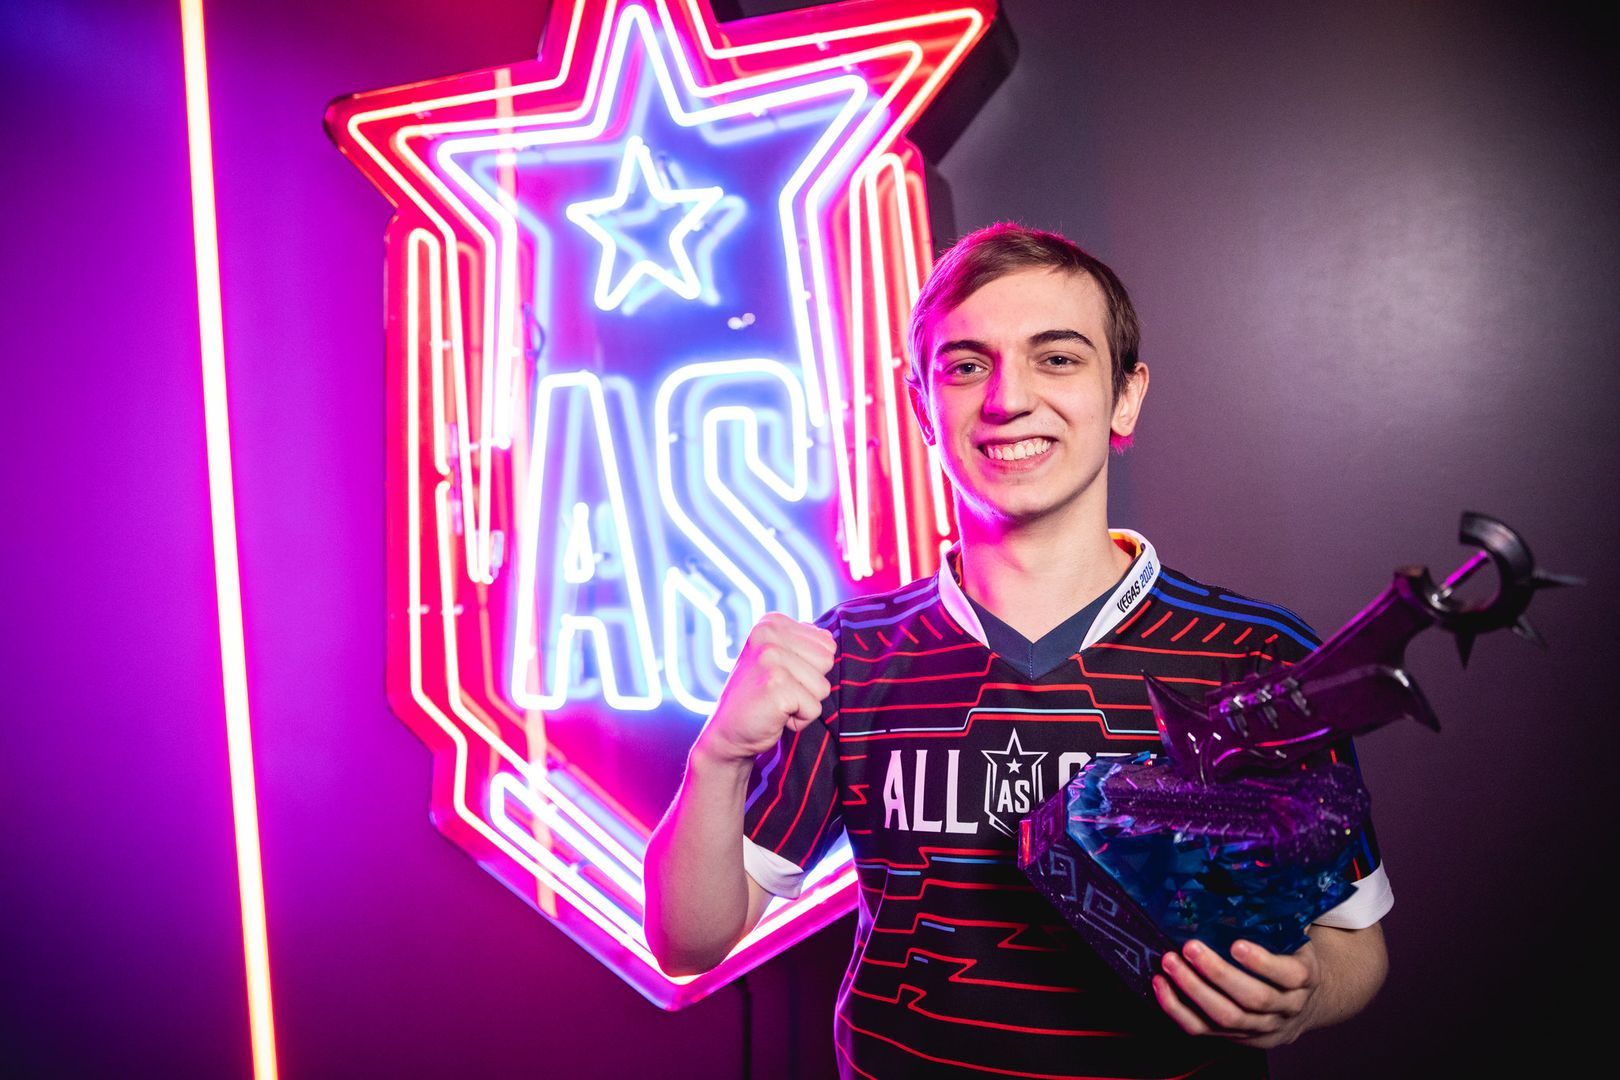 Everything you need to know about the League of Legends AllStar Event